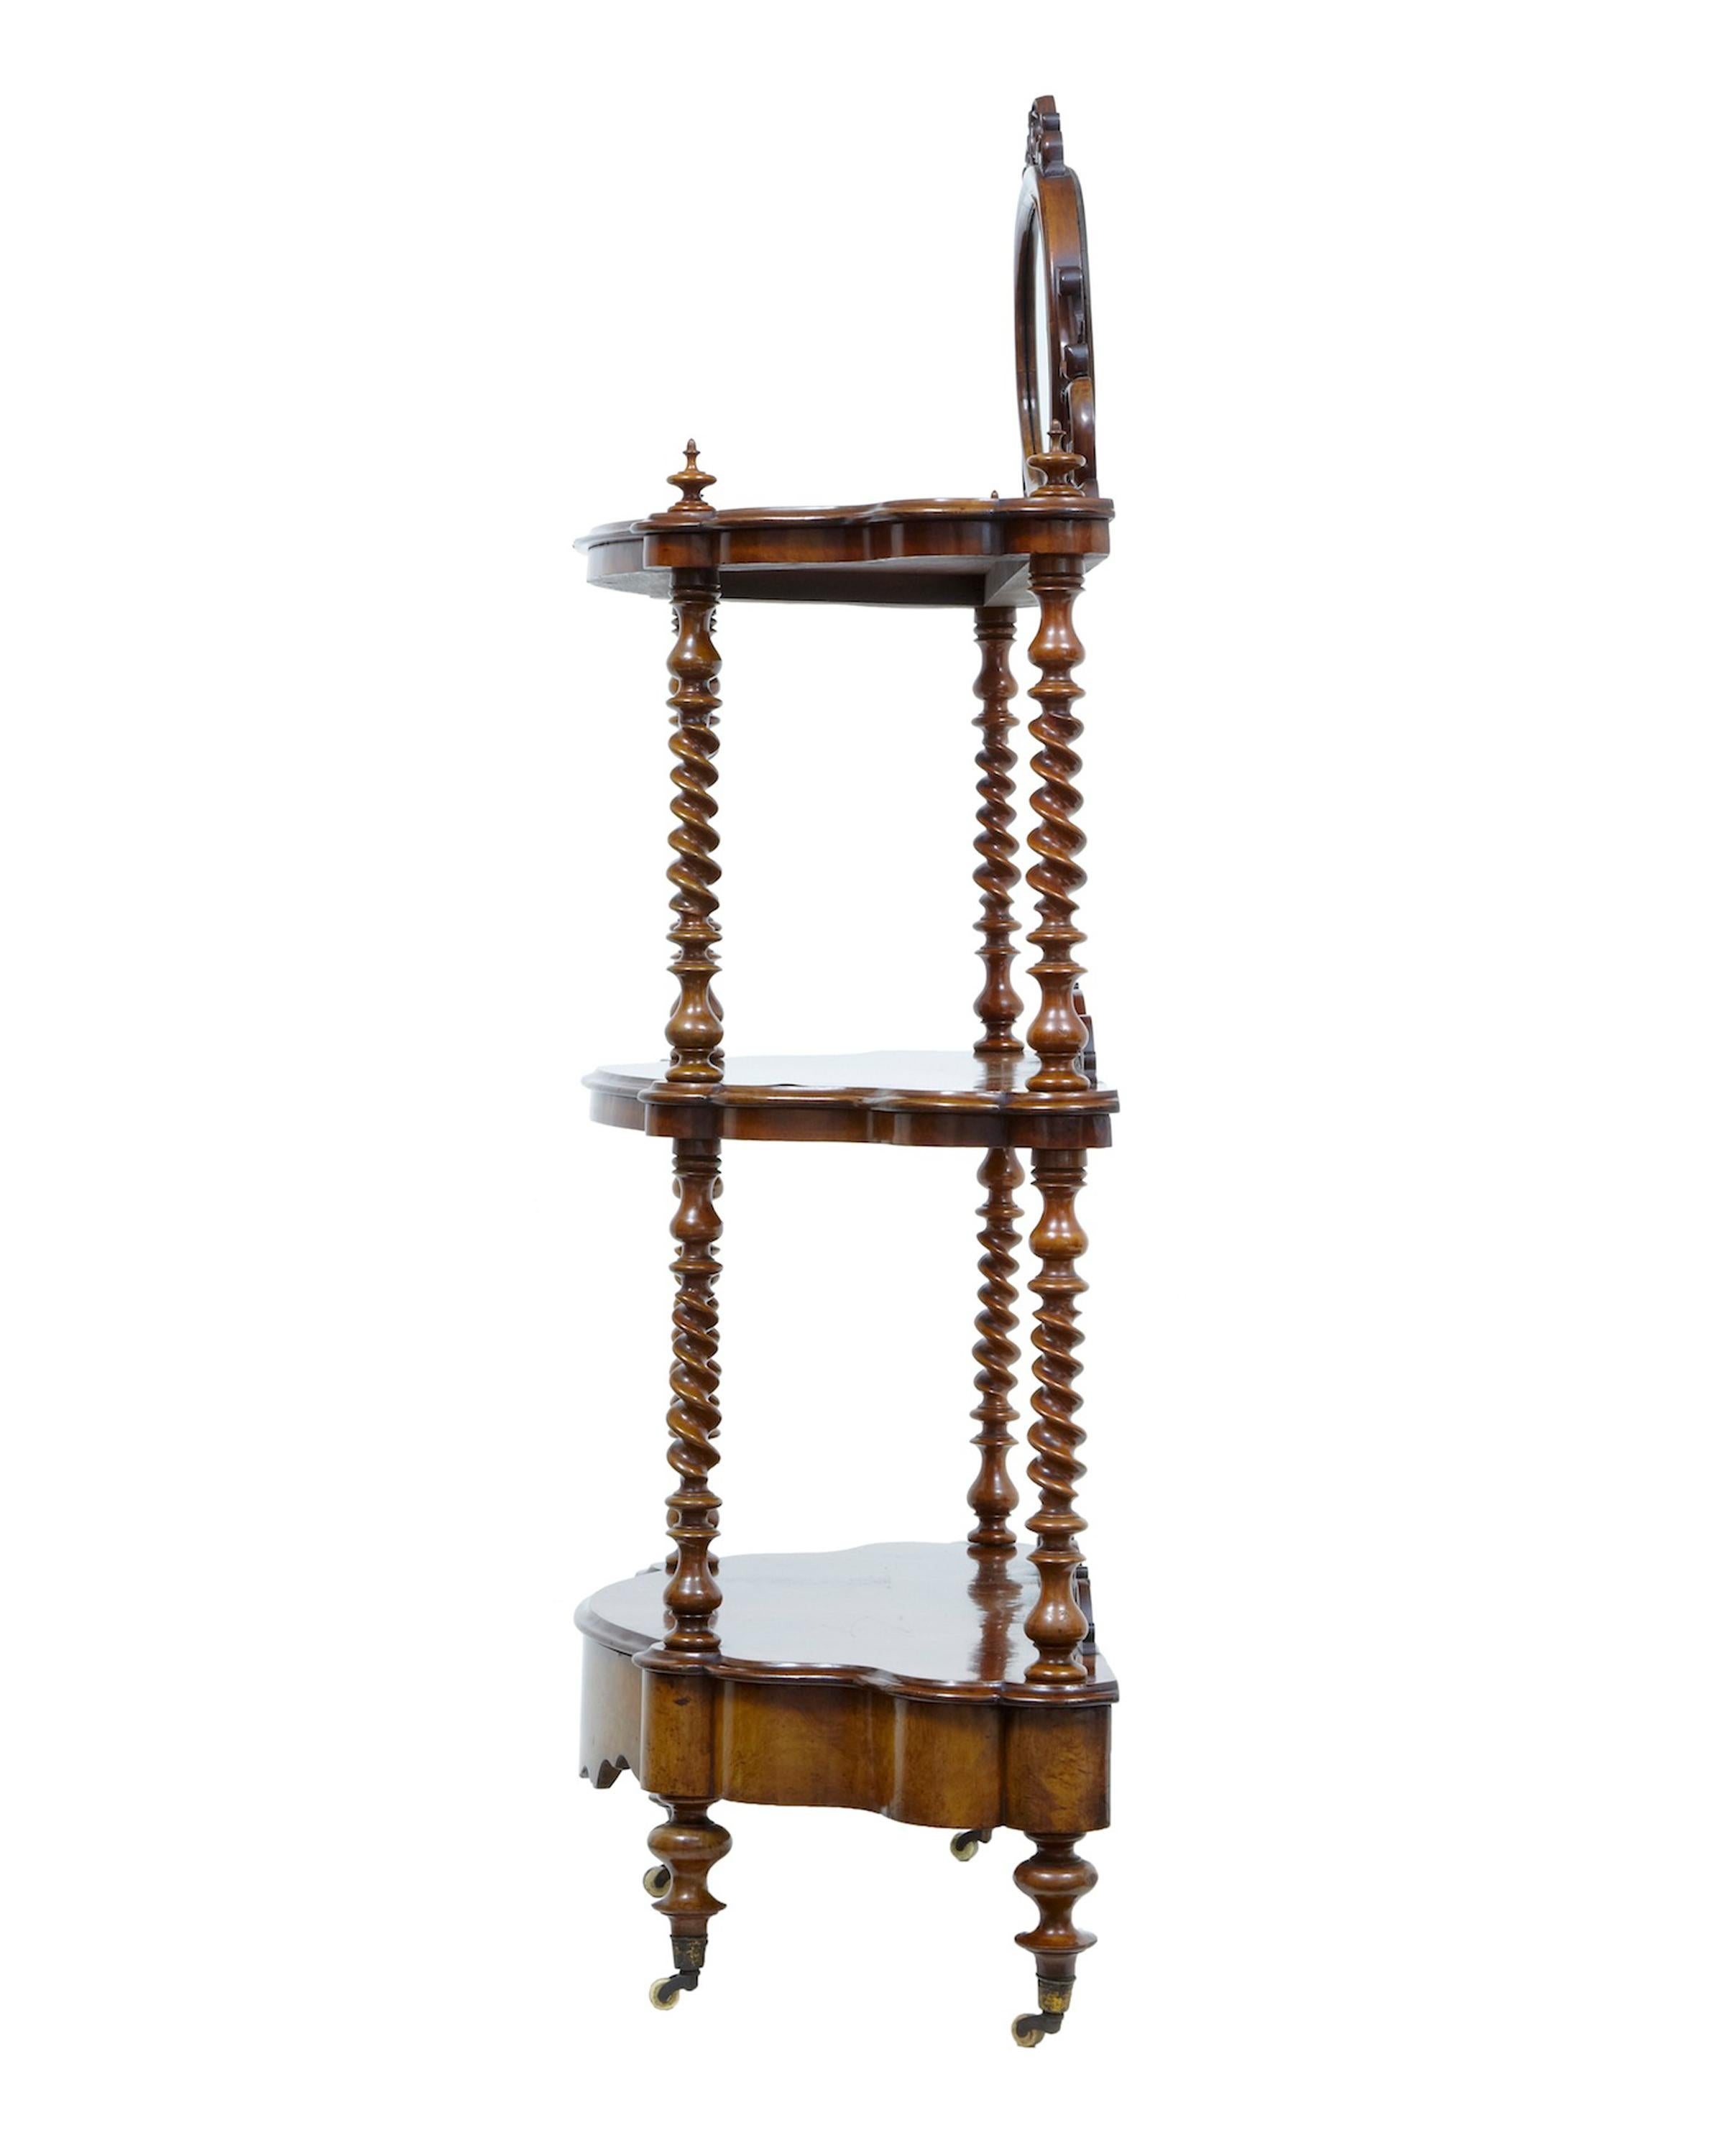 19th century walnut victorian what not stand, circa 1870.

Good quality walnut what not. Beautifully veneered in burr walnut. 3 tiers, top tier with mirror and applied ornate carving. United by turned twists. Drawer in the base, standing on